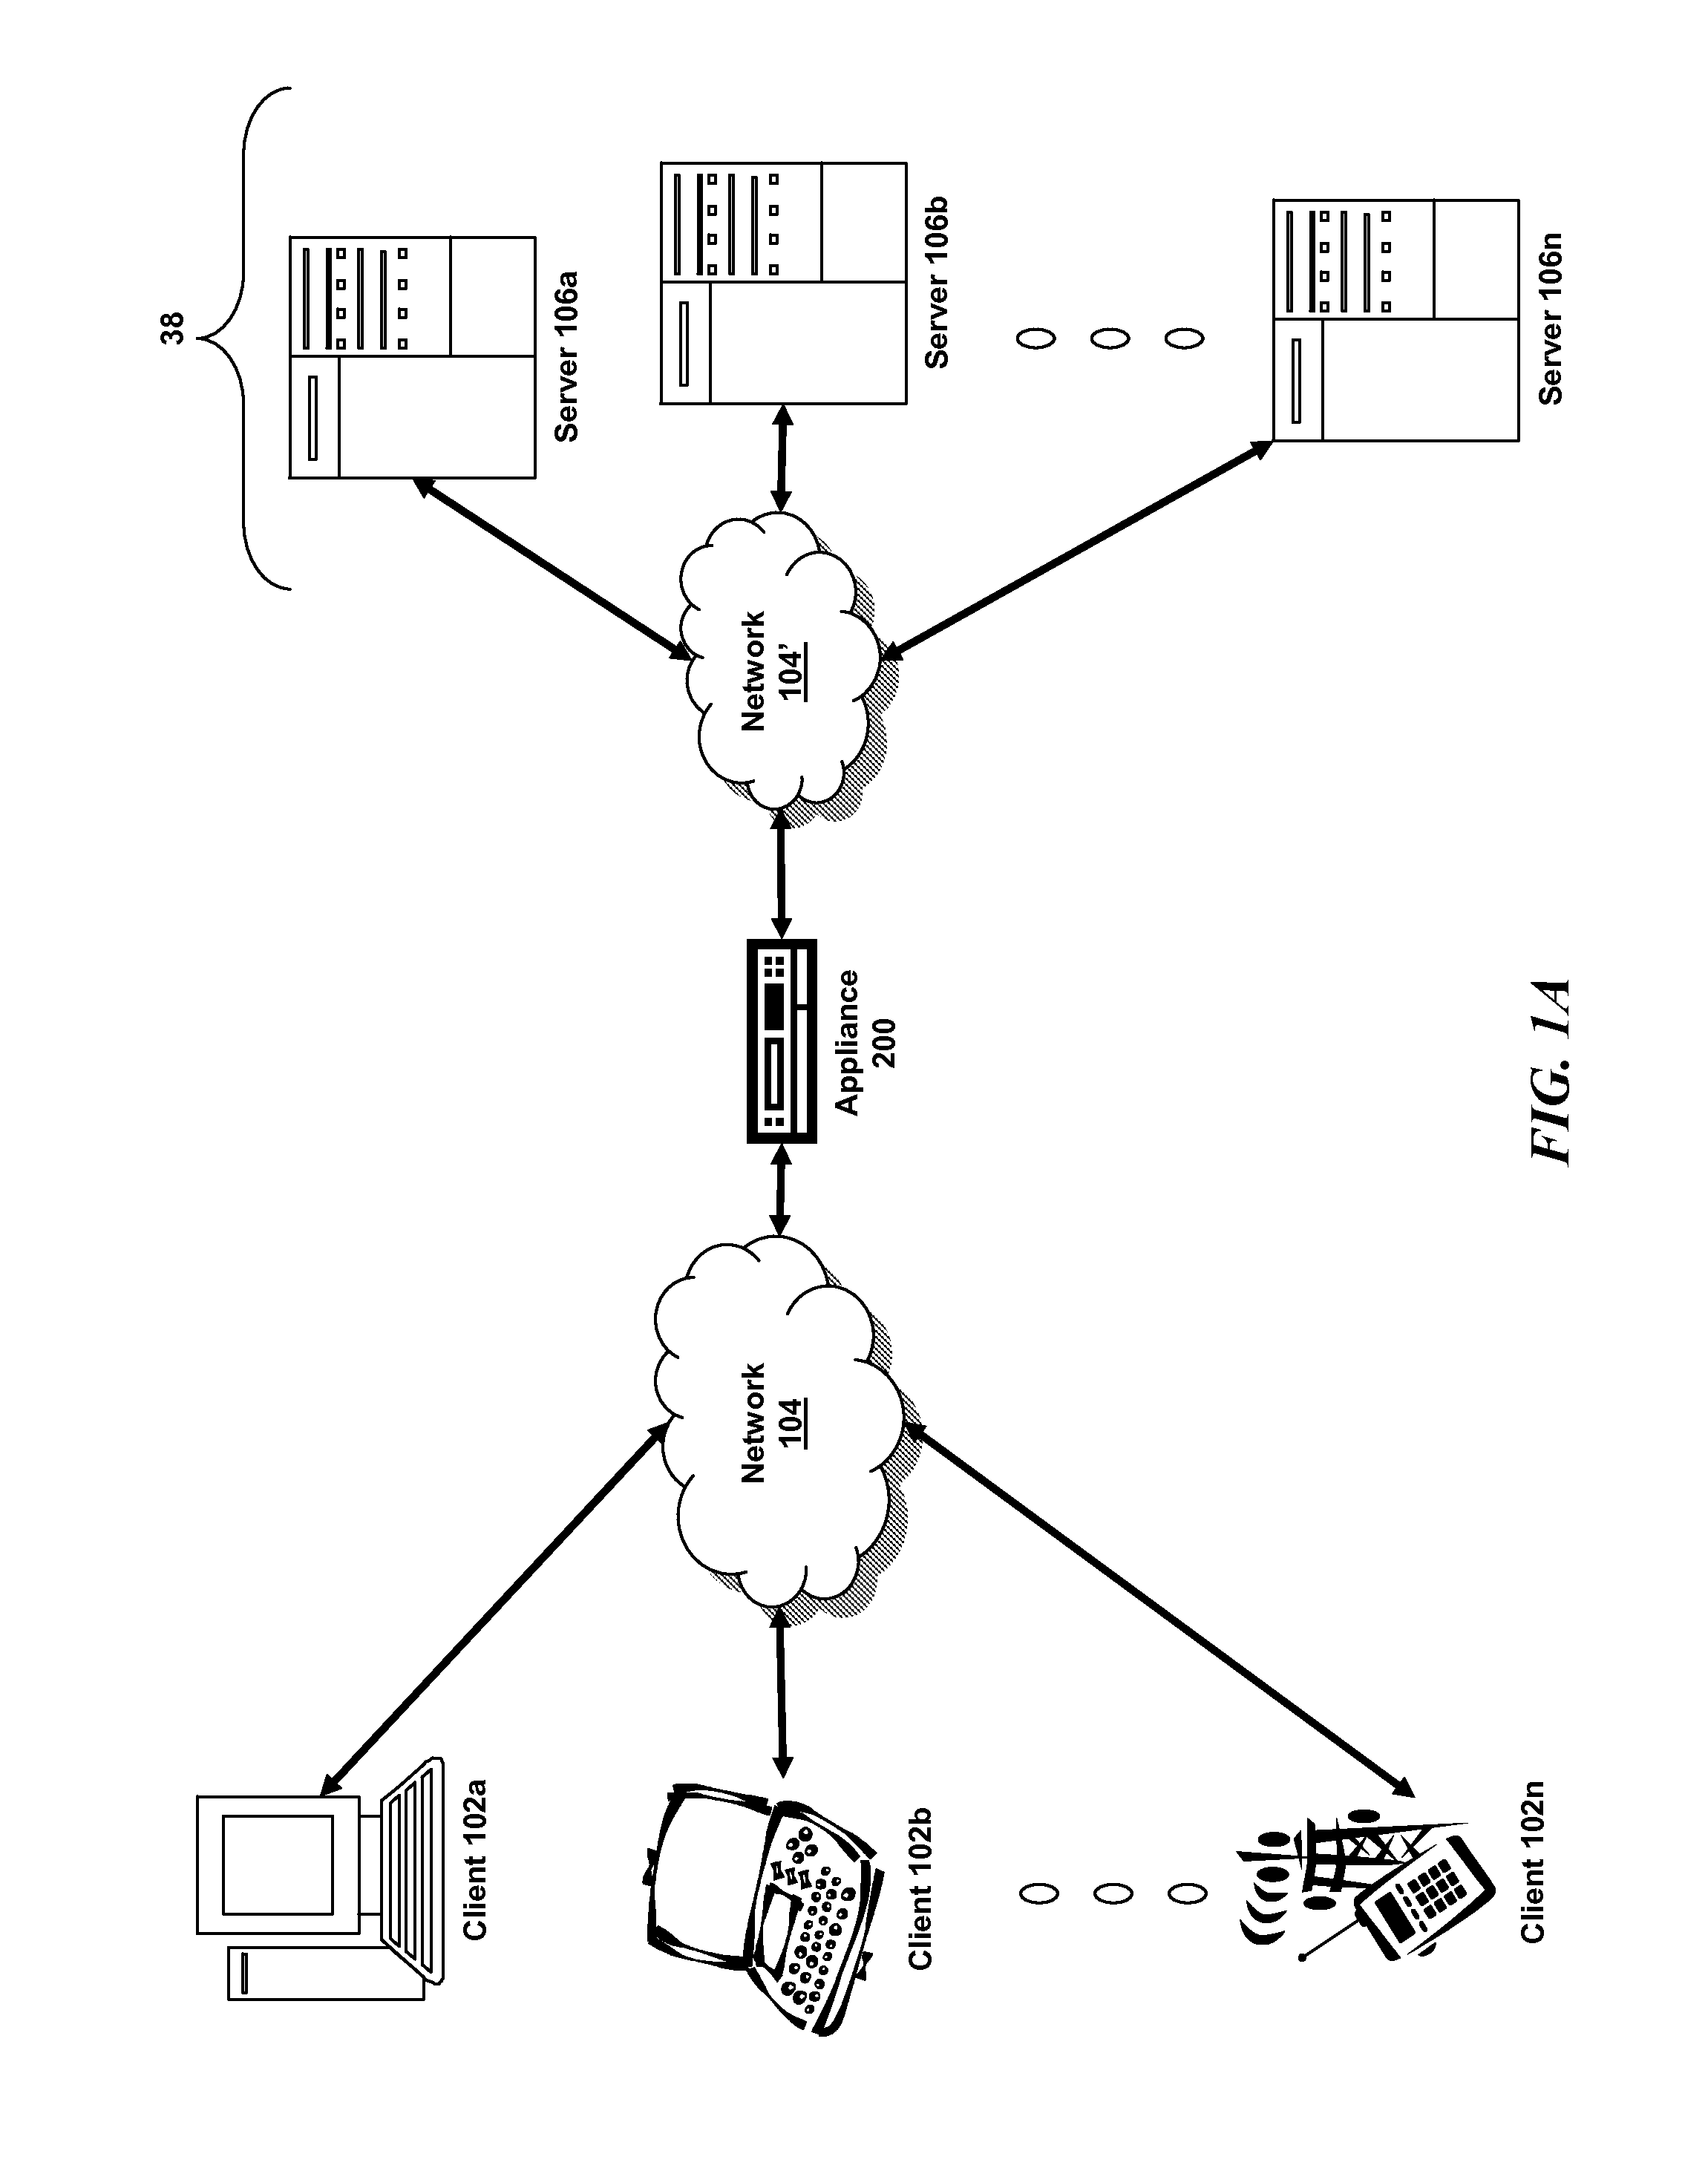 Systems and methods for managing large cache services in a multi-core system